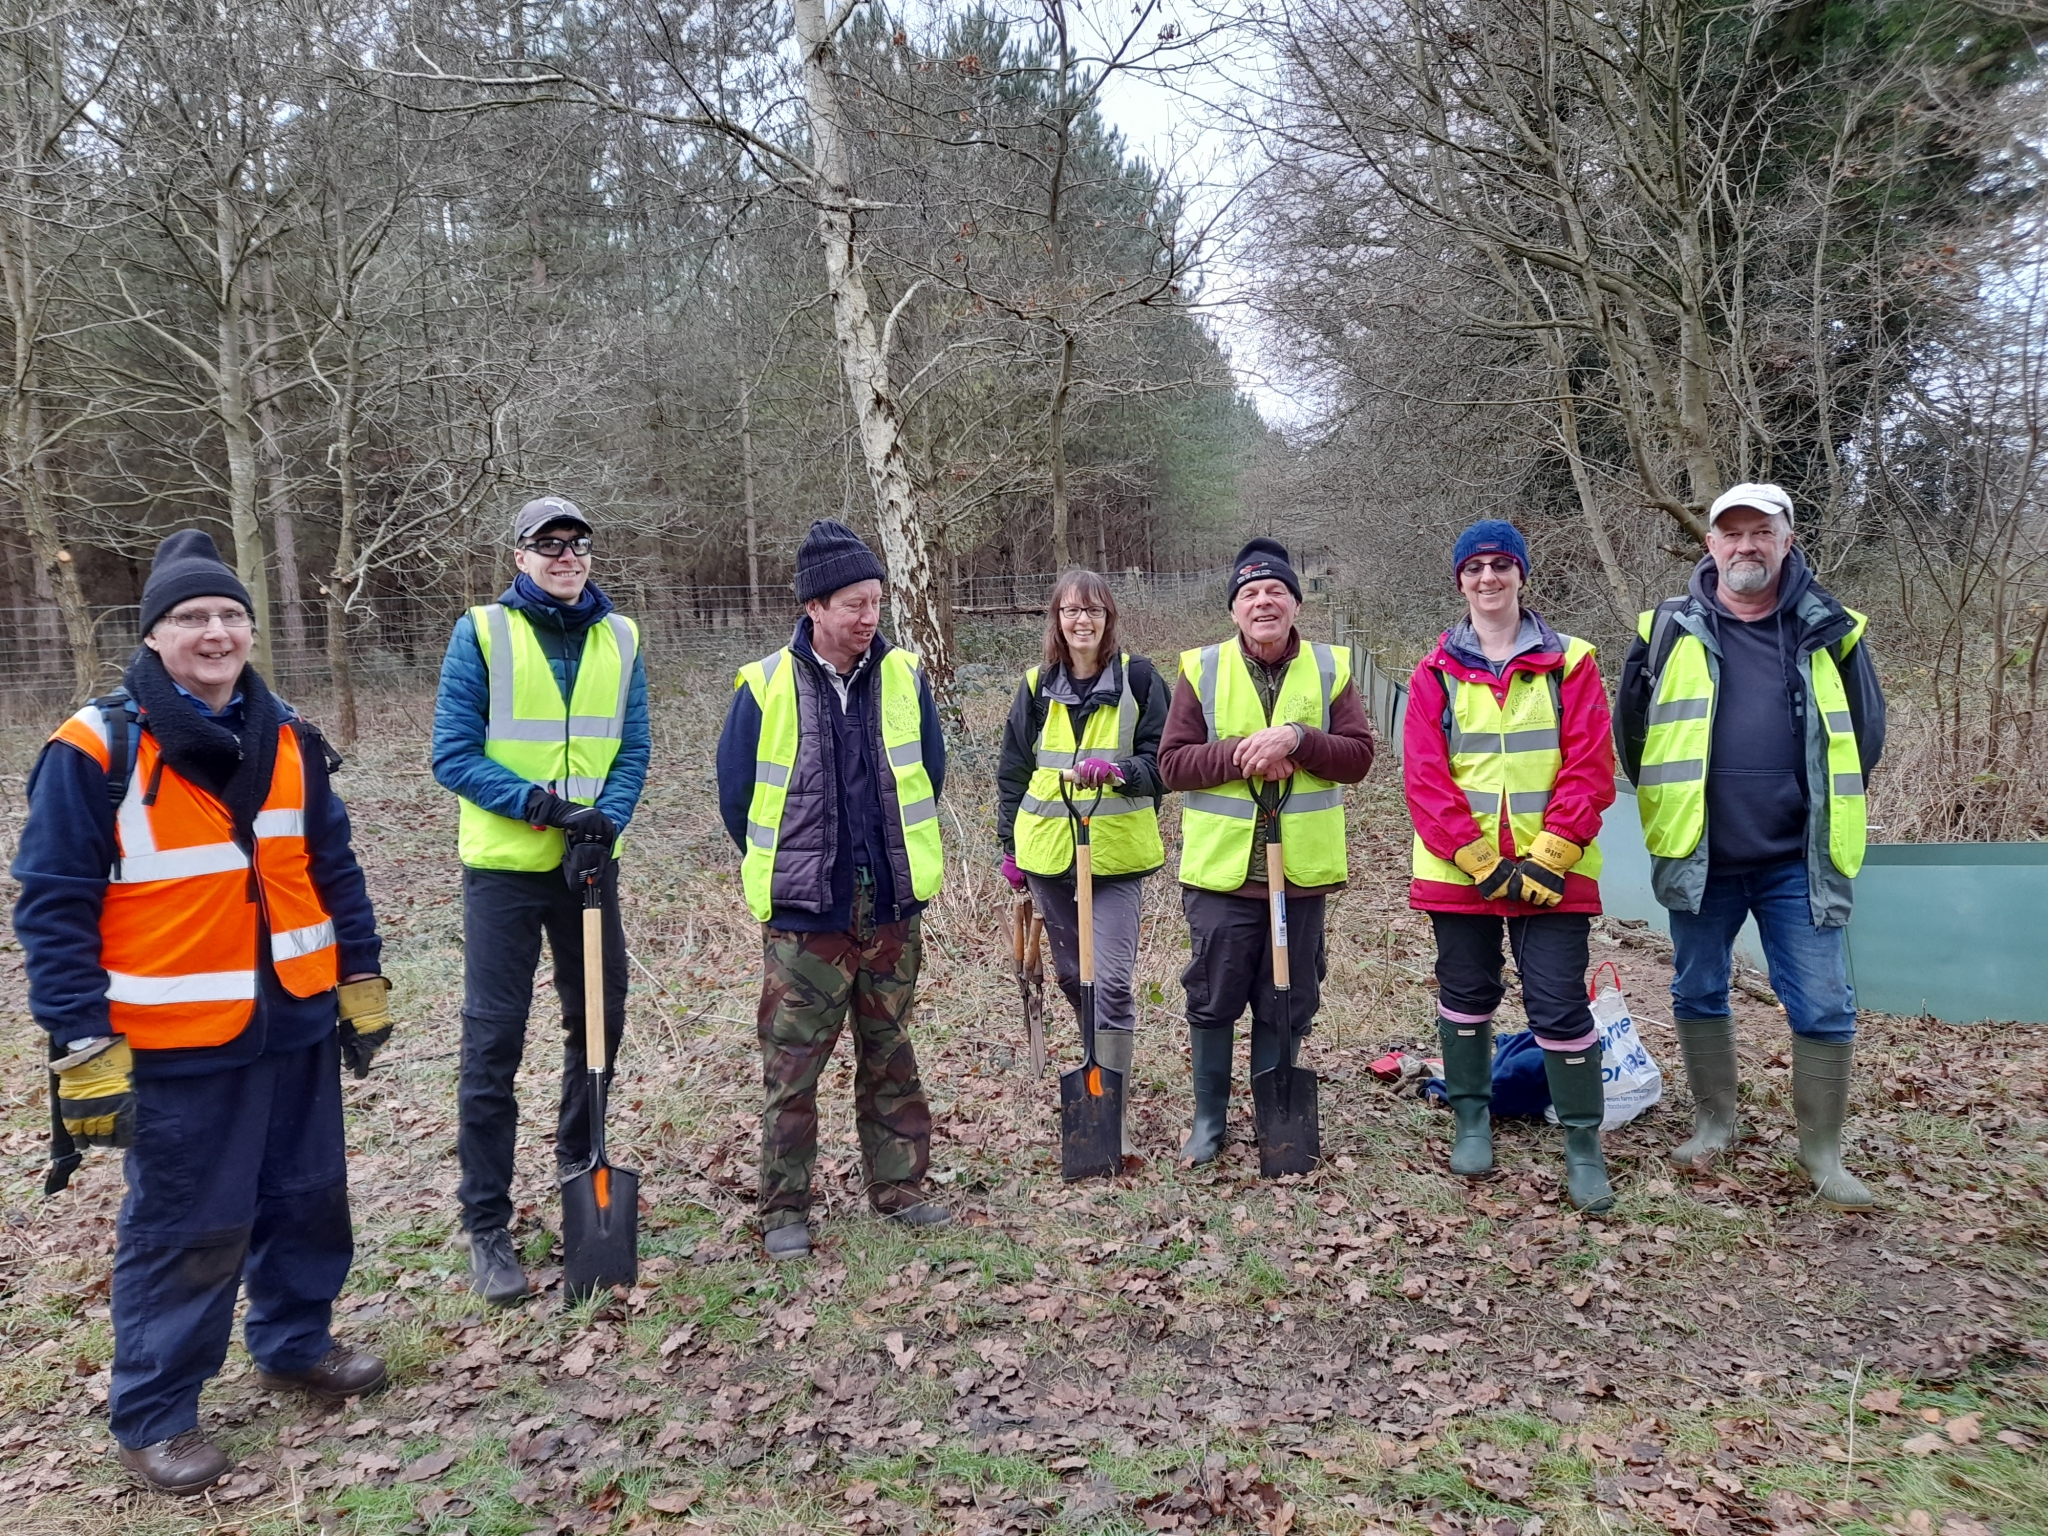 A photo from the FoTF Conservation Event - January 2022 - Erection of toad fence : A group photo of some of the volunteers